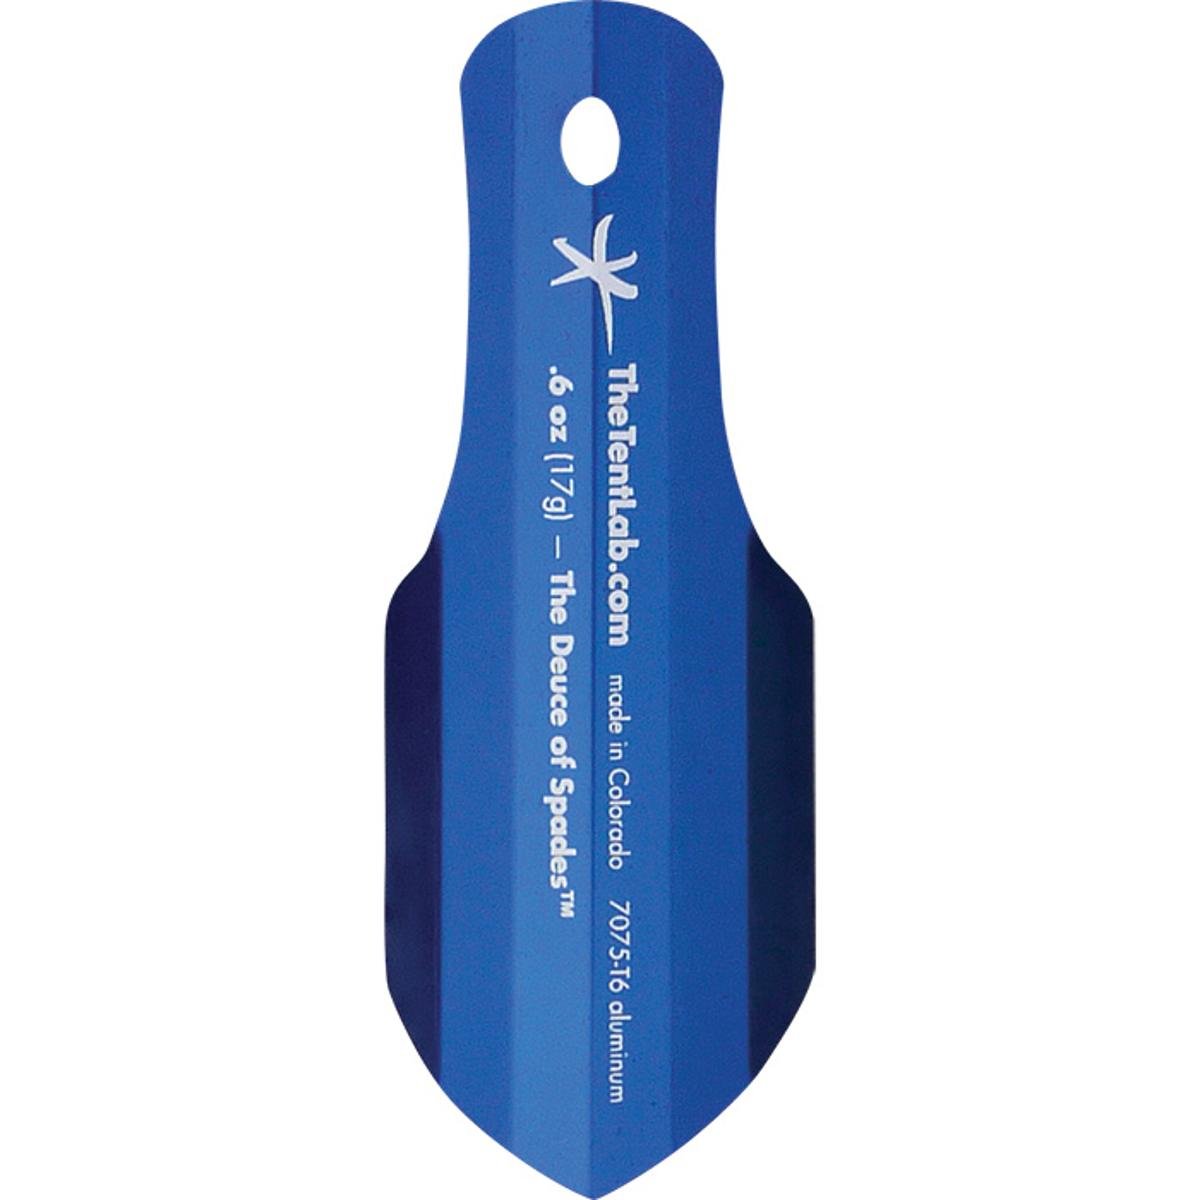 The Deuce of Spades Backcountry Trowel Gift ideas for hikers